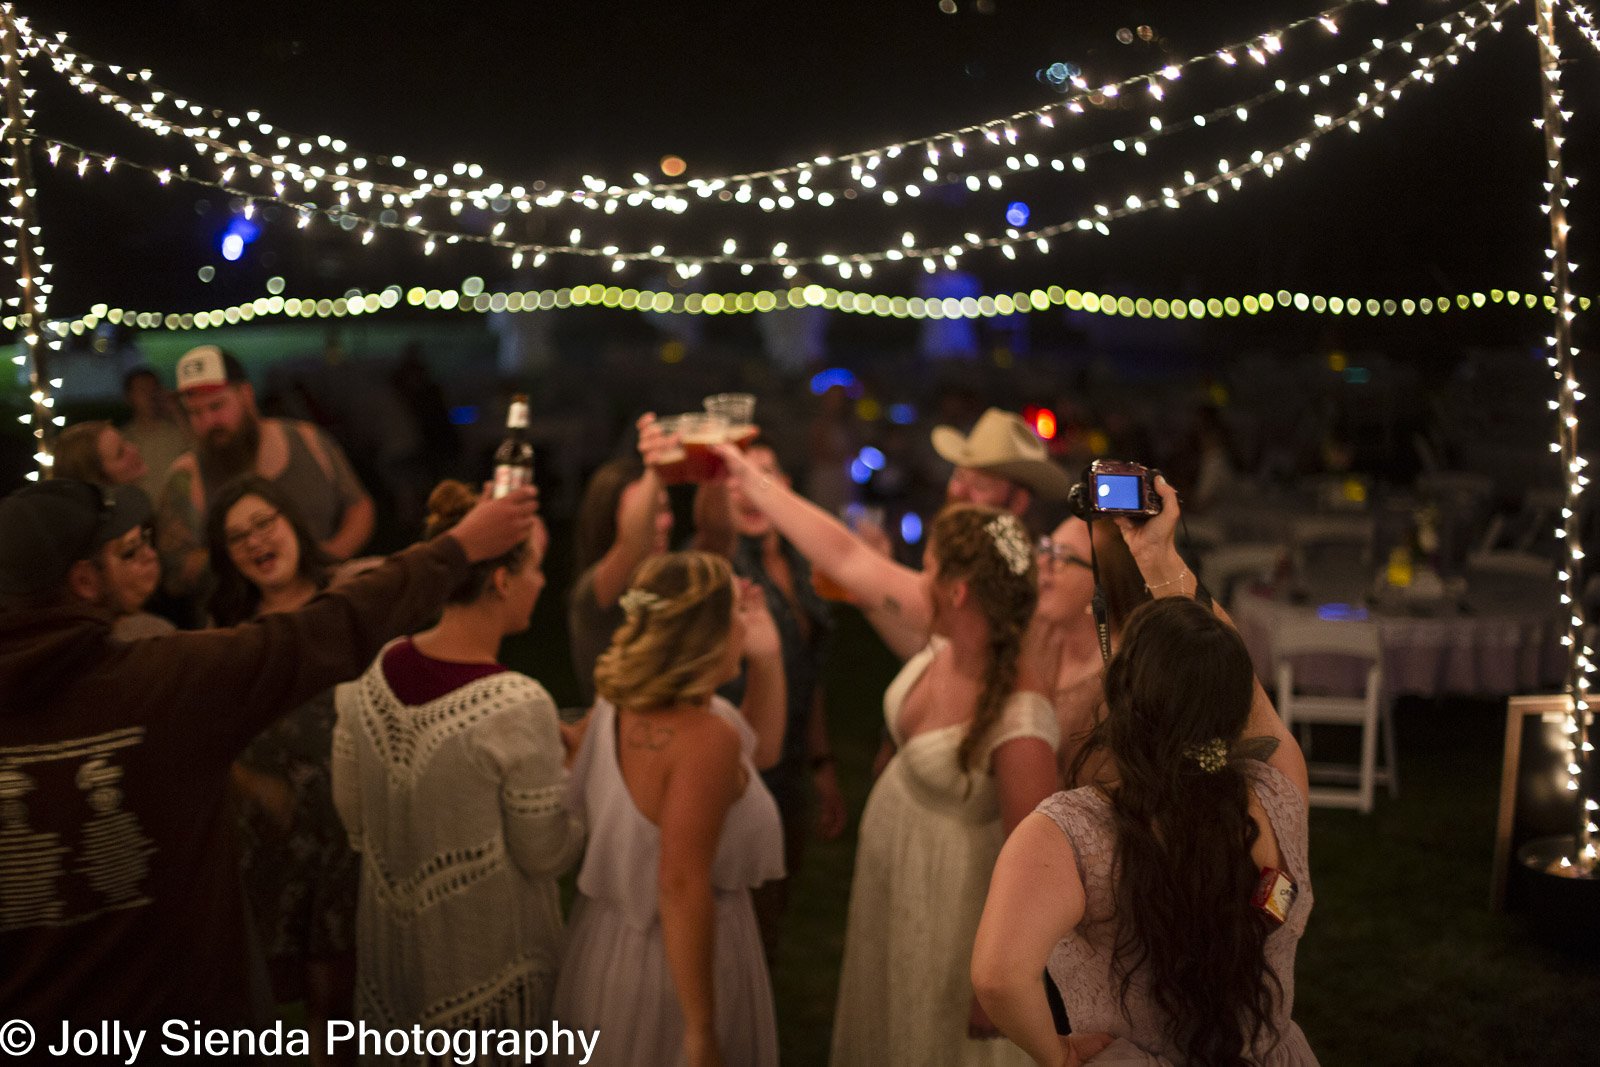 Kitsap county wedding receptions by Jolly Sienda Photography and